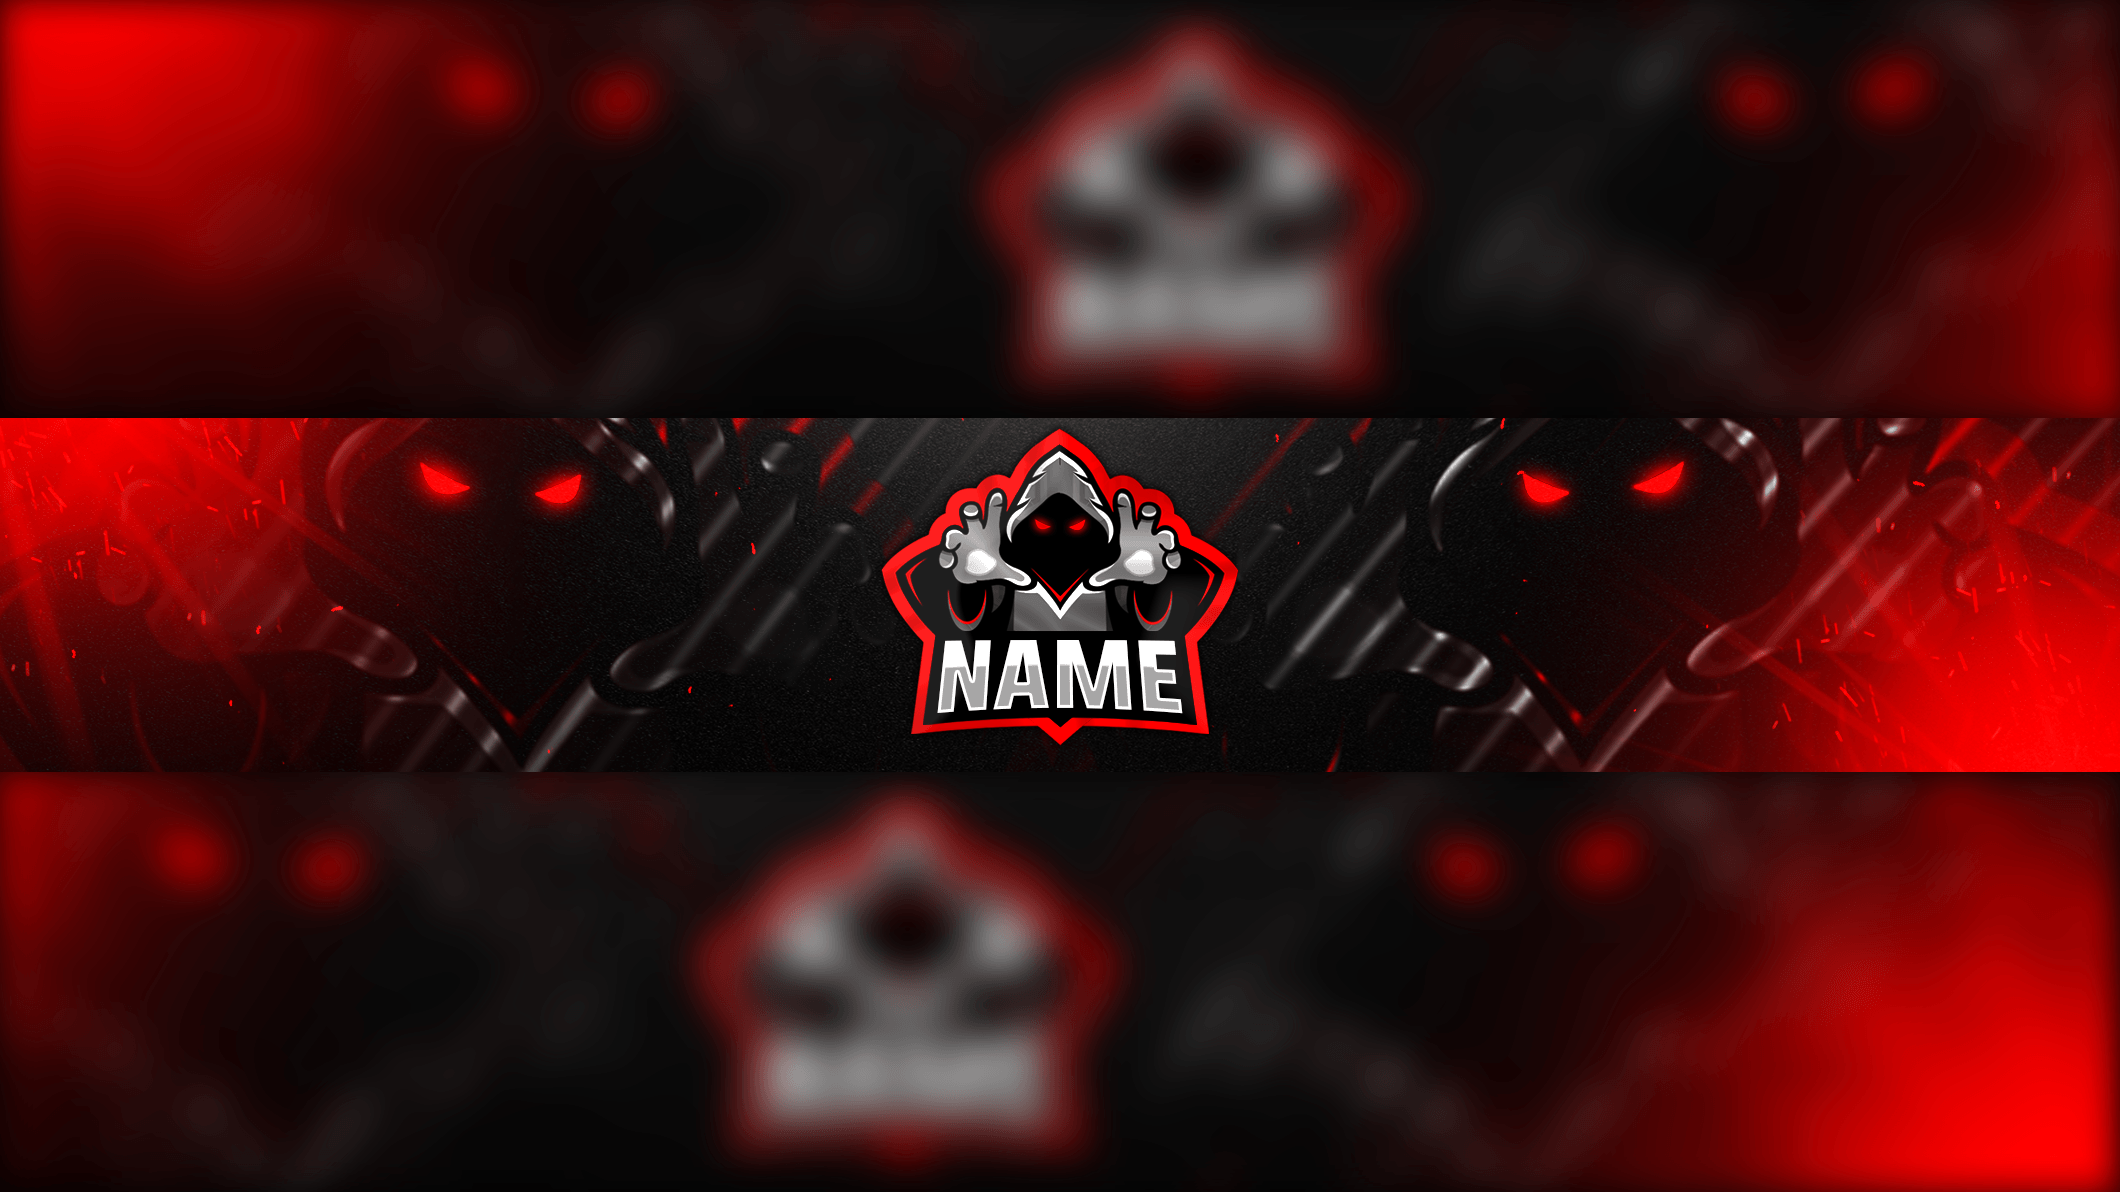  Red  Riper Gaming  Clan Mascot Banner  Free PSD Zonic 